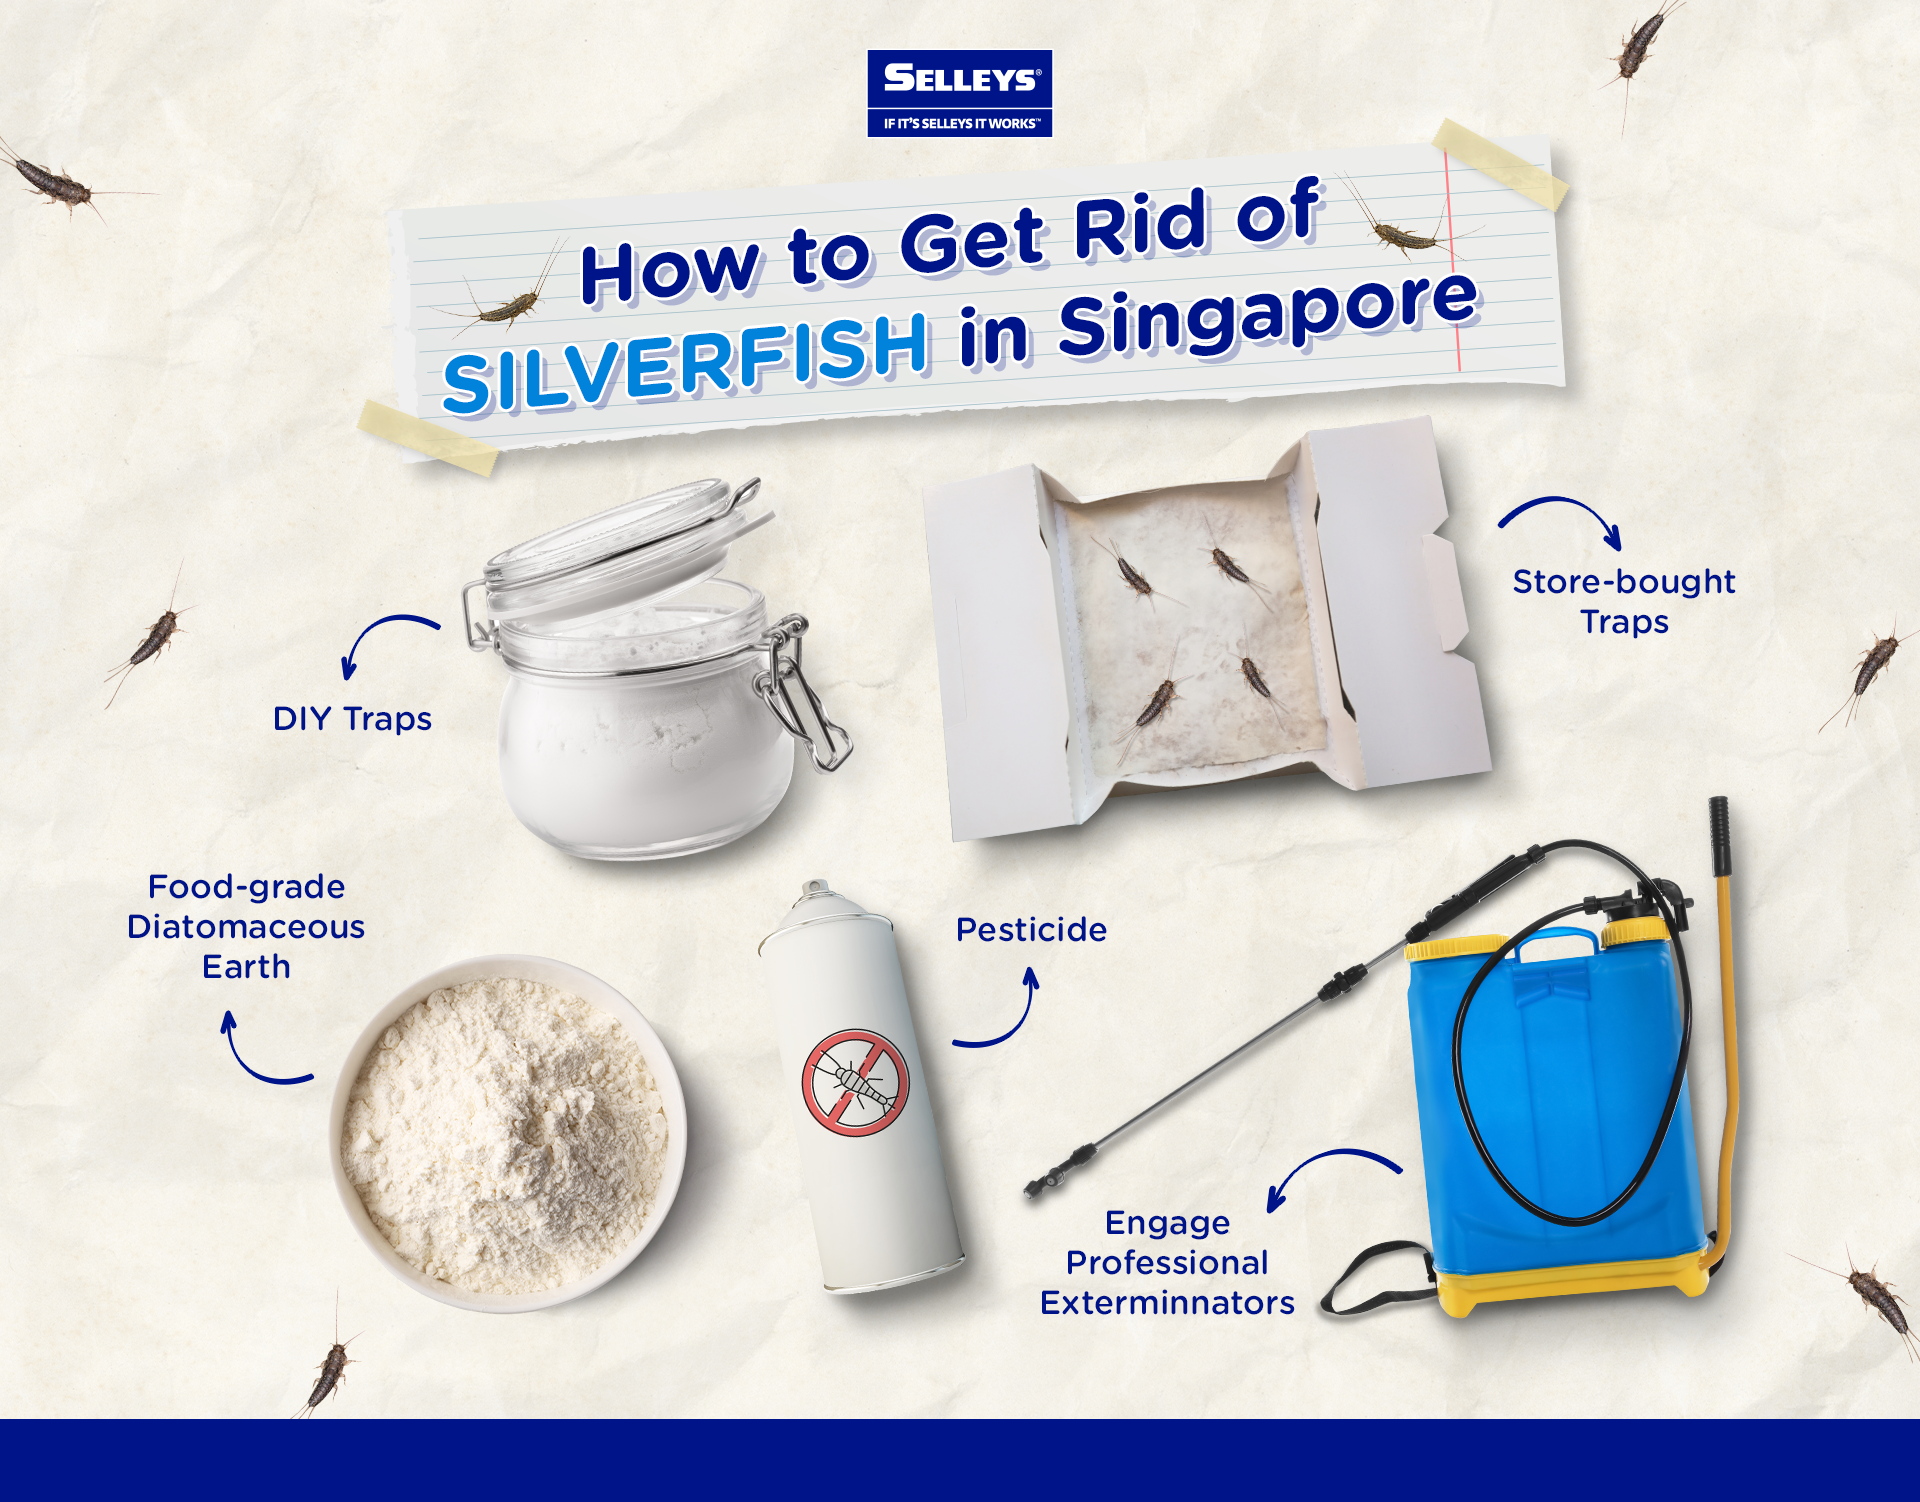 How To Get Rid Of Silverfish In Singapore - Infographic